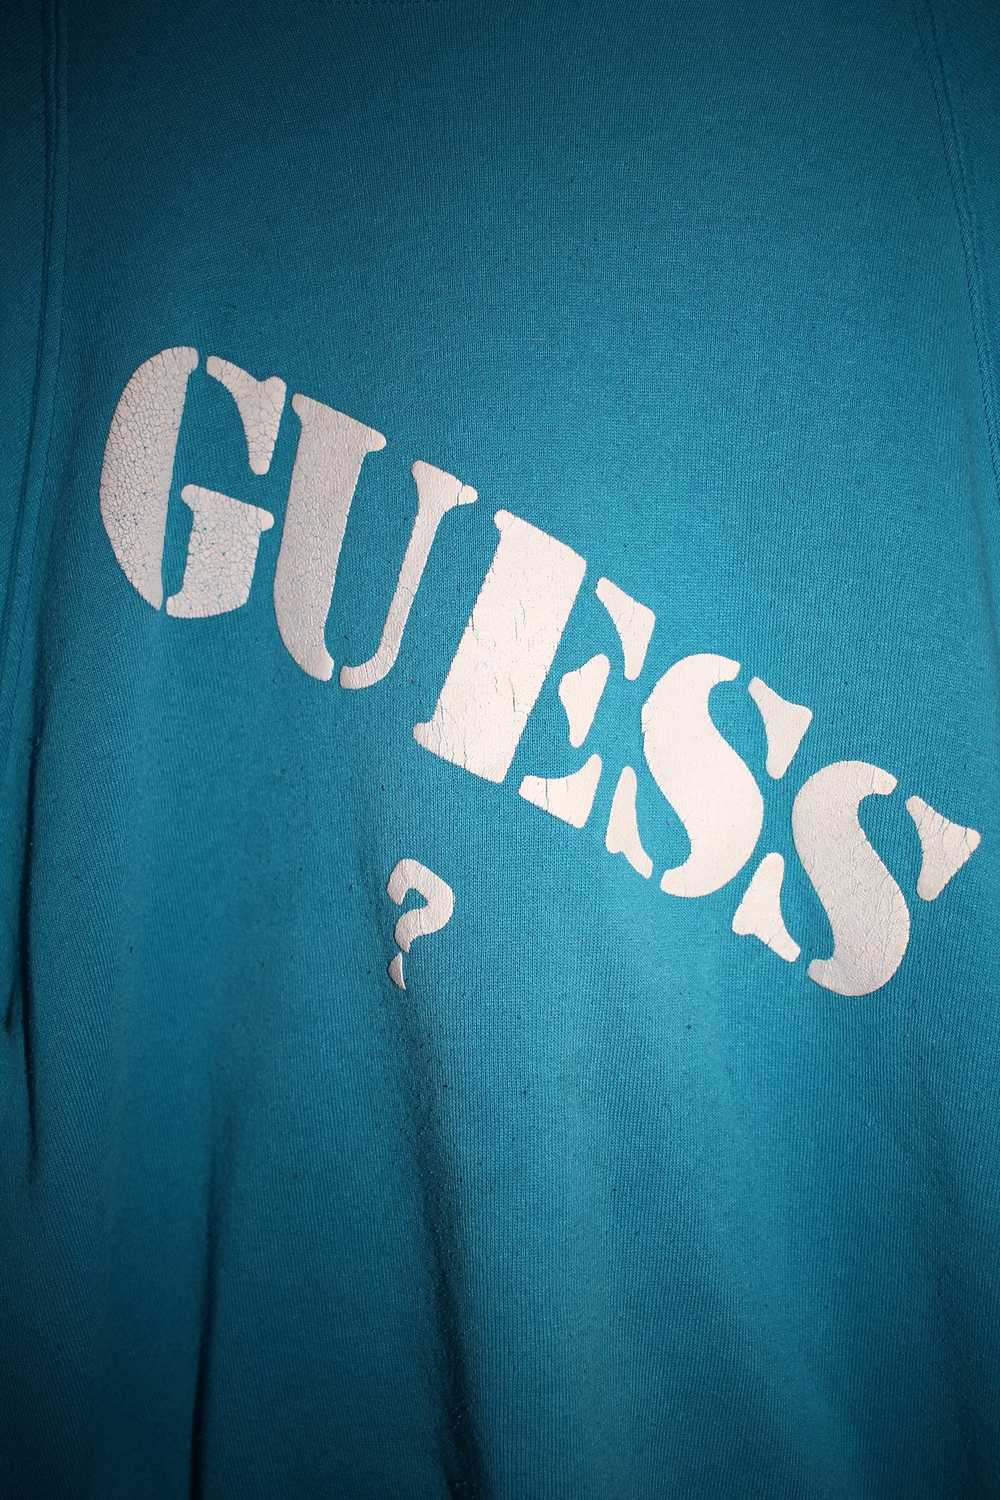 Guess × Vintage 90s Guess ? Sweatshirt (Turquoise) - image 4